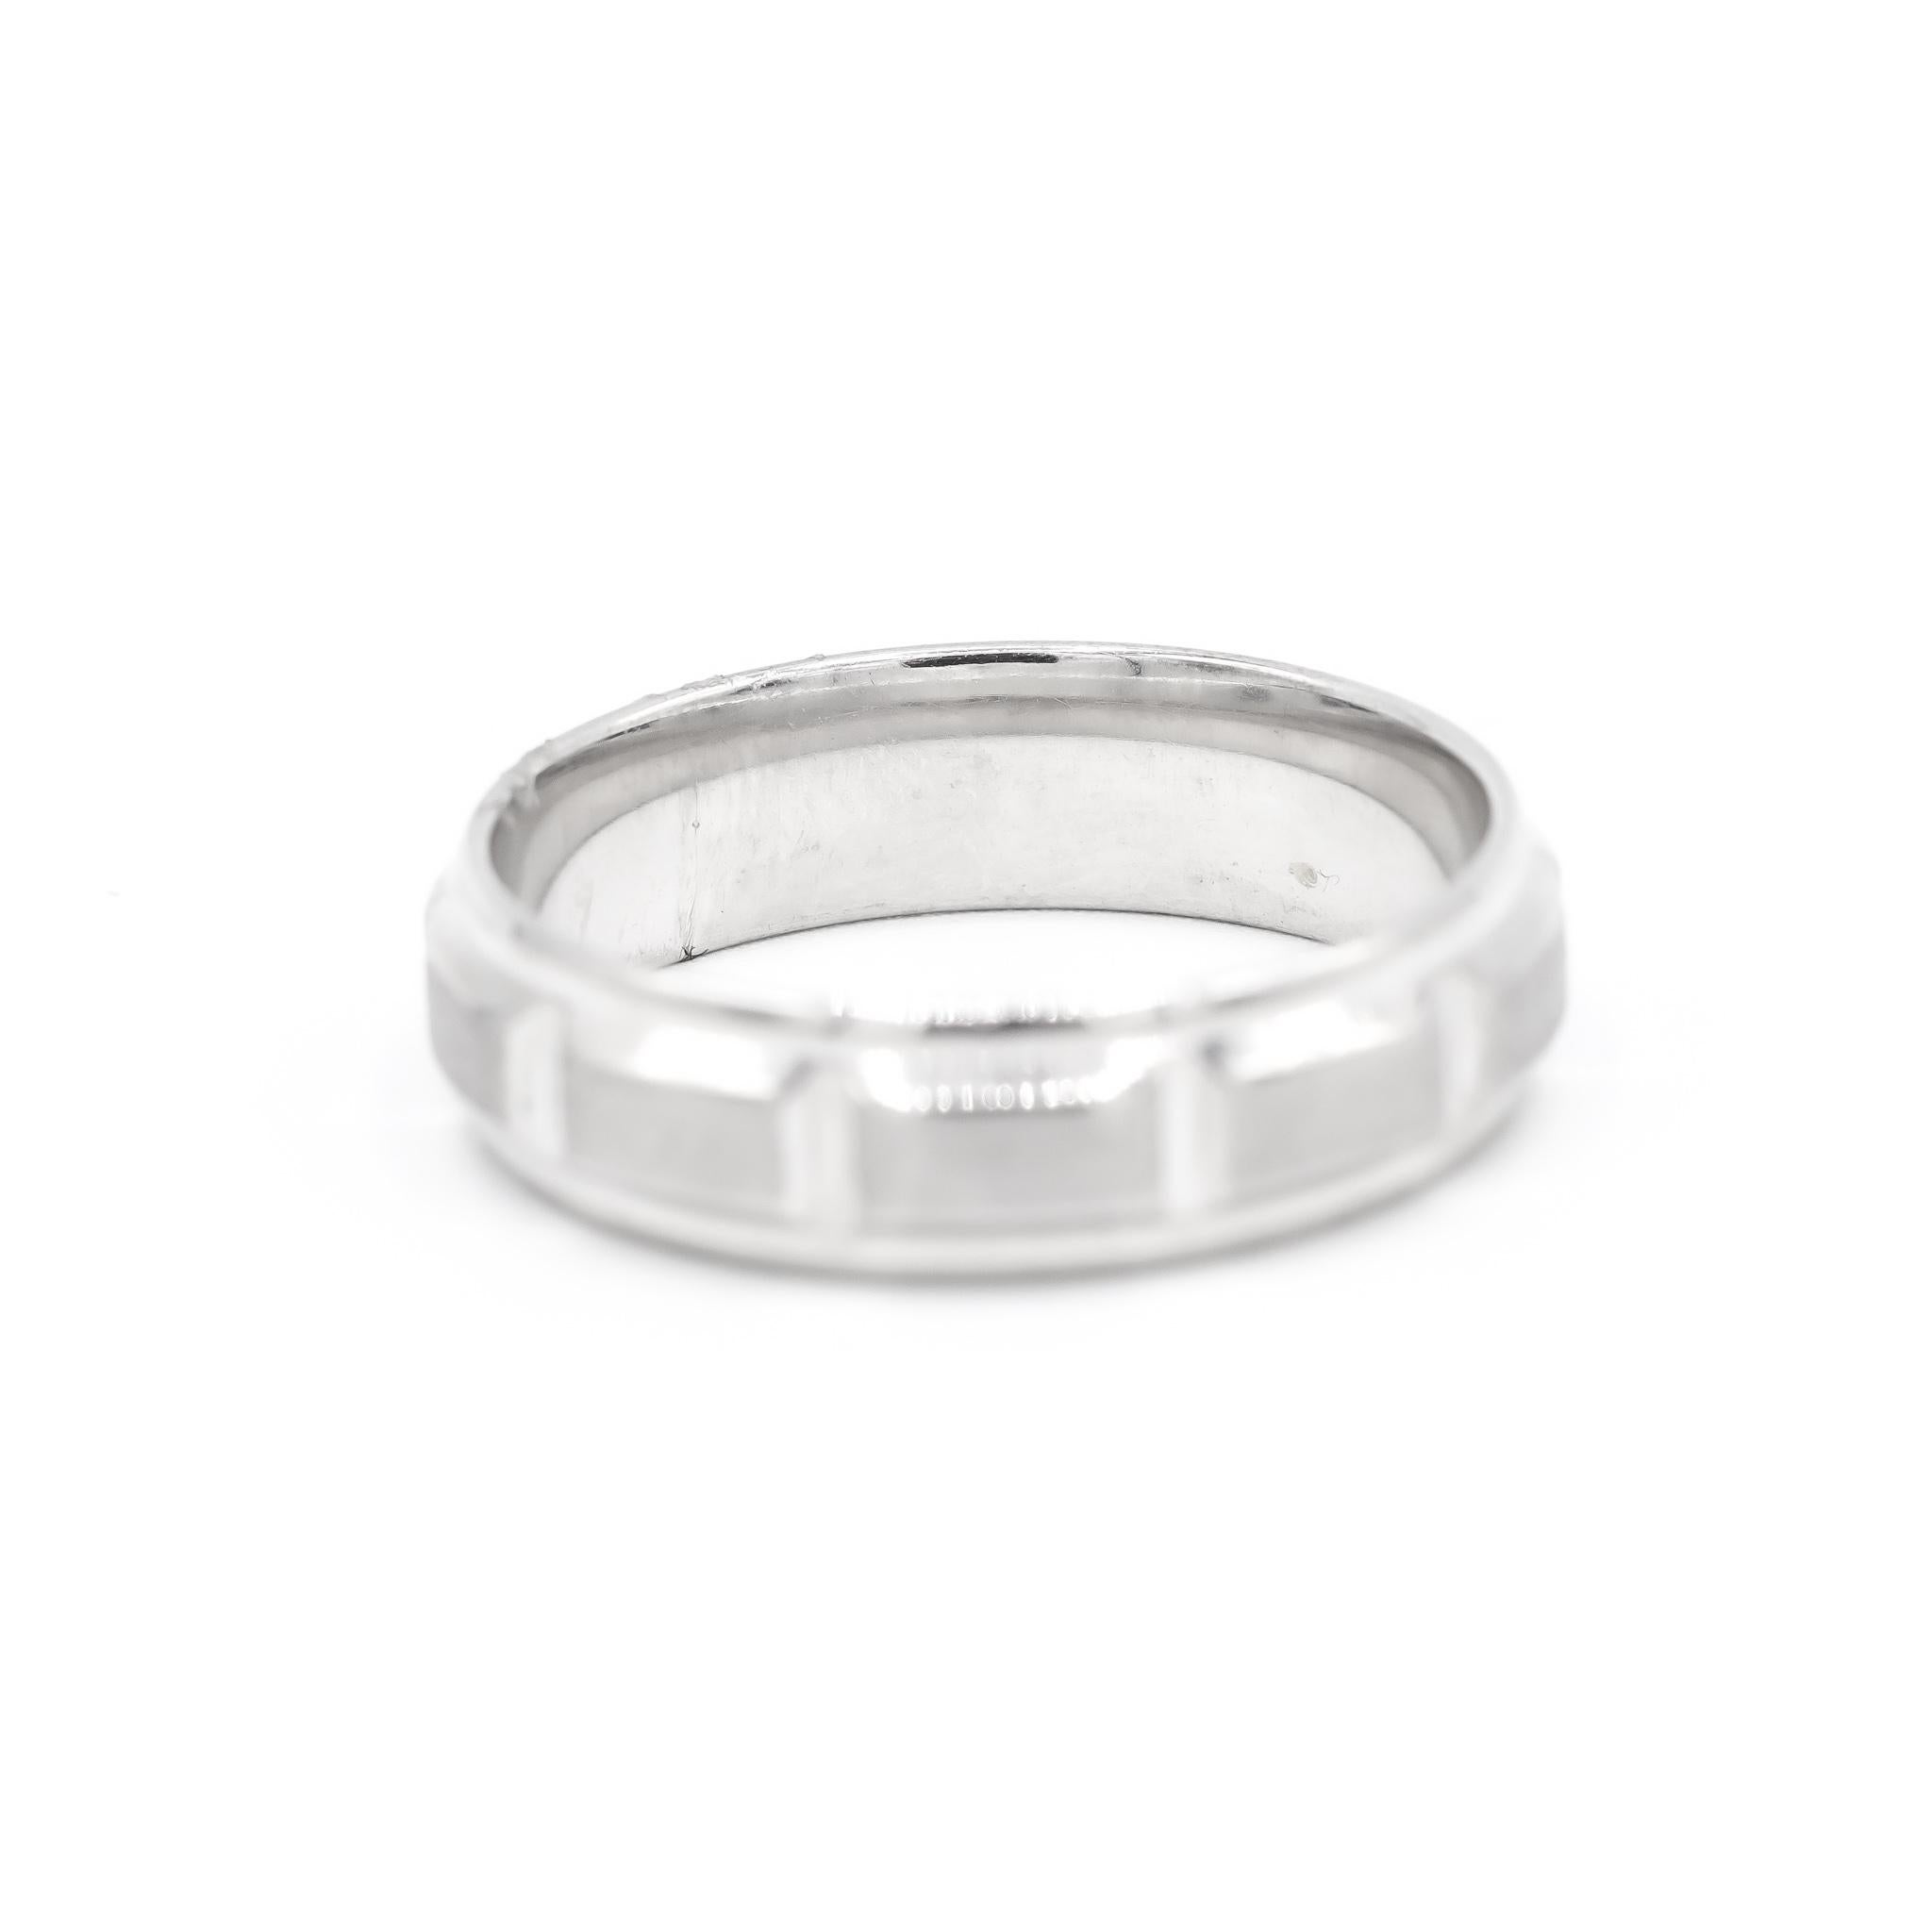 One man's custom made brushed & polished rhodium plated 14K white gold, wedding, anniversary band with a soft-square shank. The band is a size 12. The band weighs a total of 8.20 grams. Engraved with 